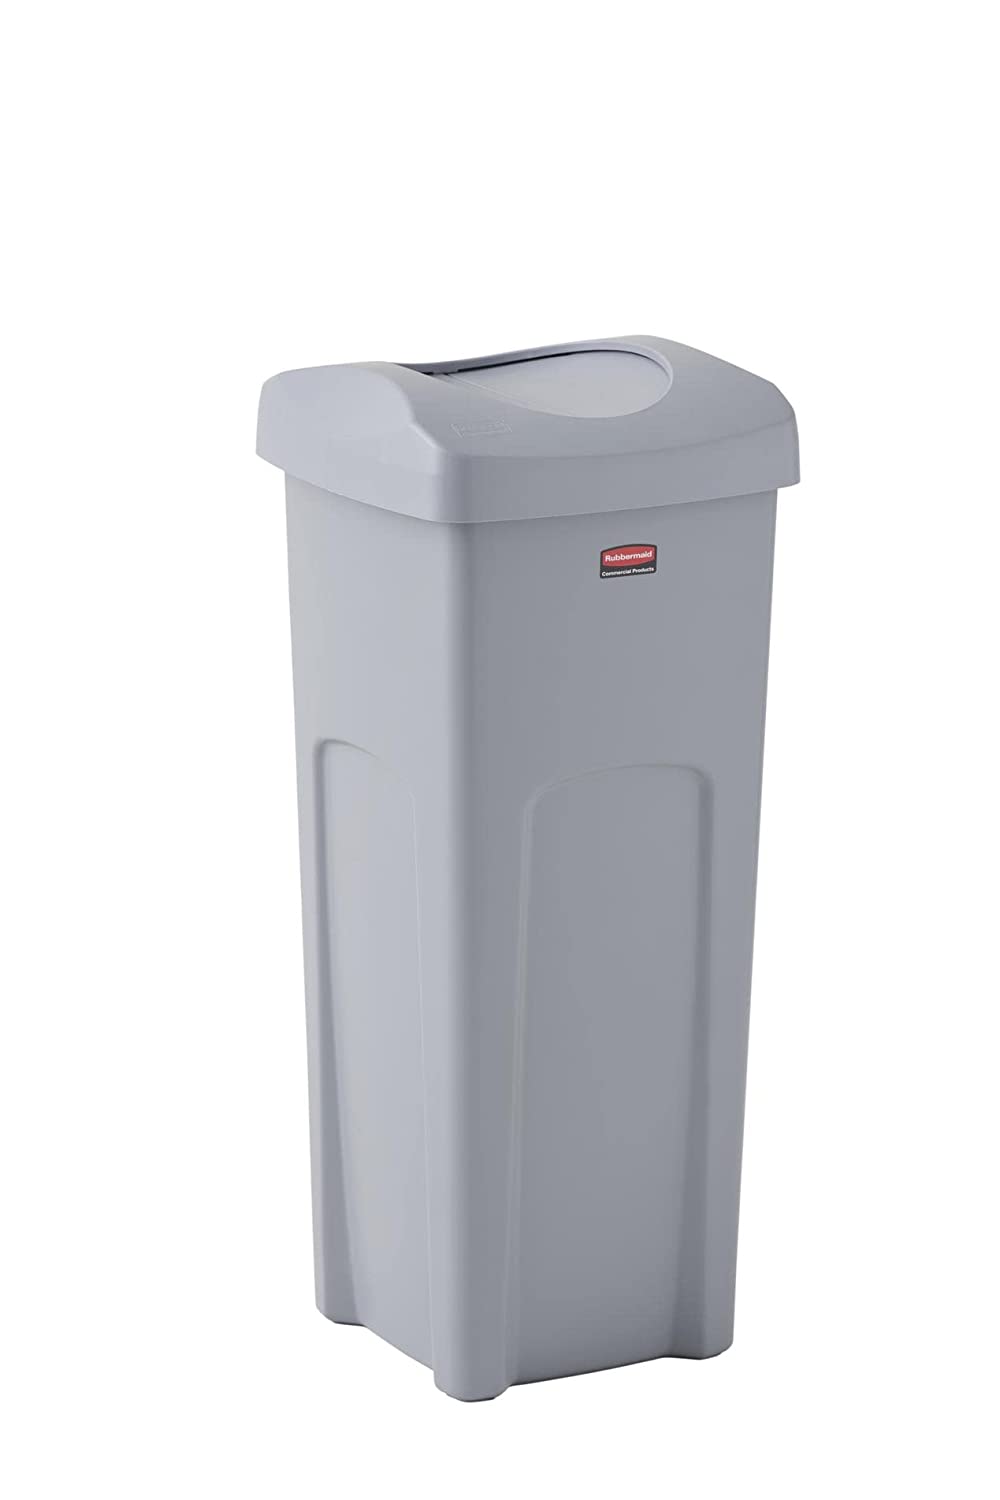 Rubbermaid Hands-Free Outdoor Trash Can, 23-Gallon